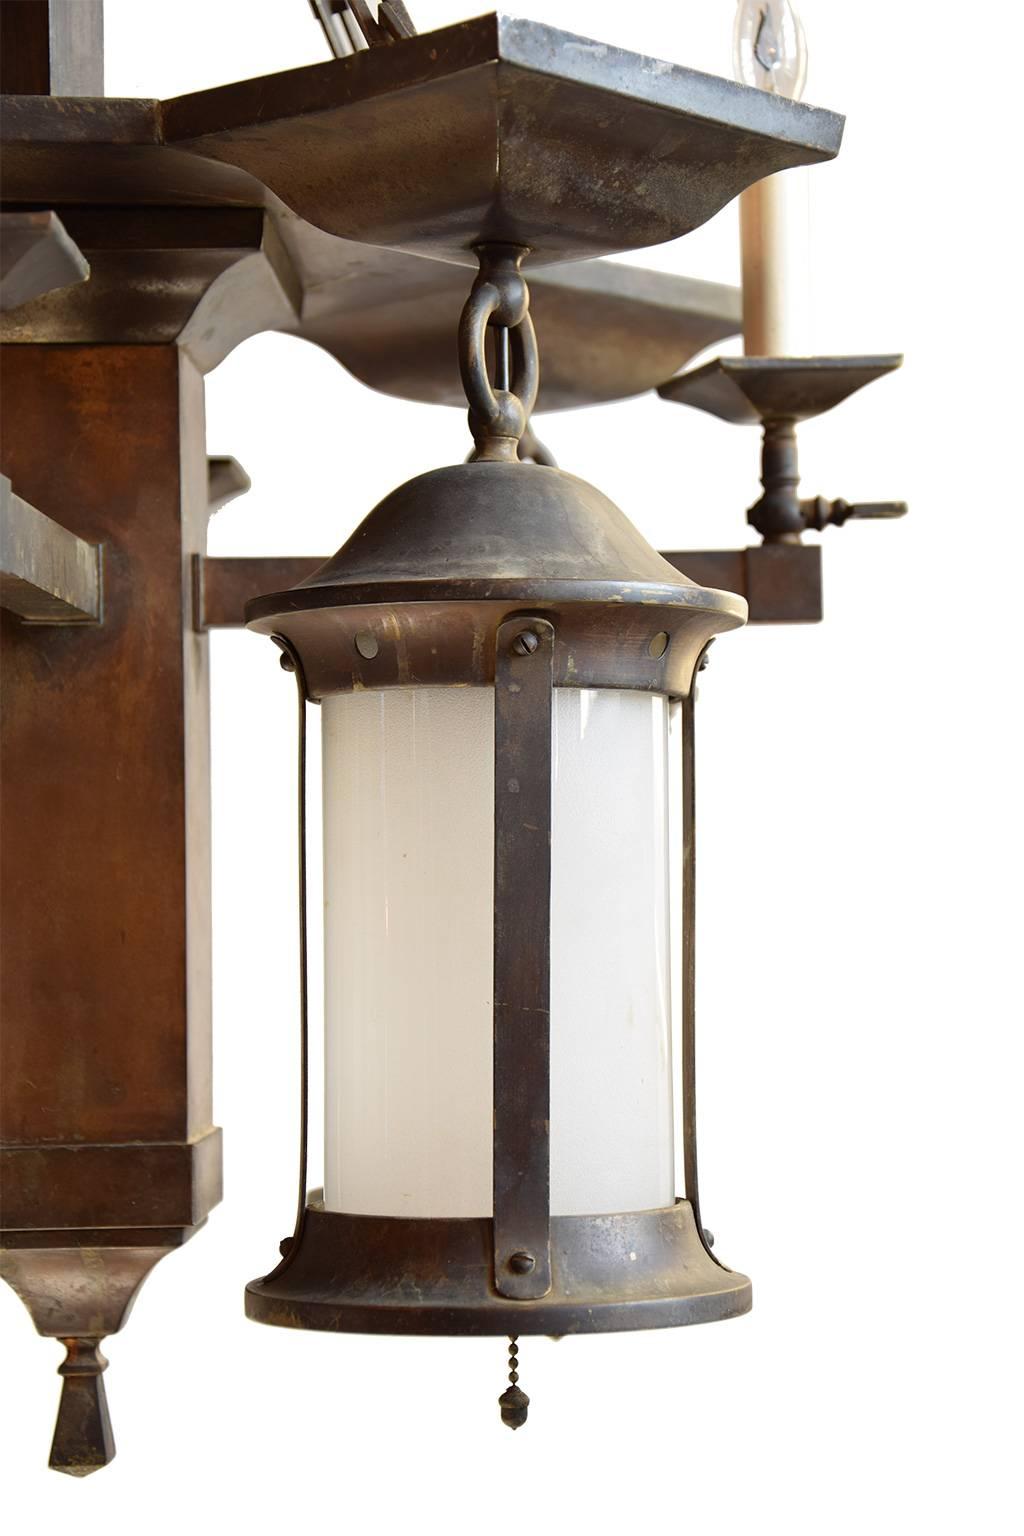 This handsome fixture creates an authentic turn-of-the-century feel that only a gas/electric chandelier can provide. It features original brass parts, square chain, patina and glass. Gas lights were most commonly used between 1820-1920, gas or